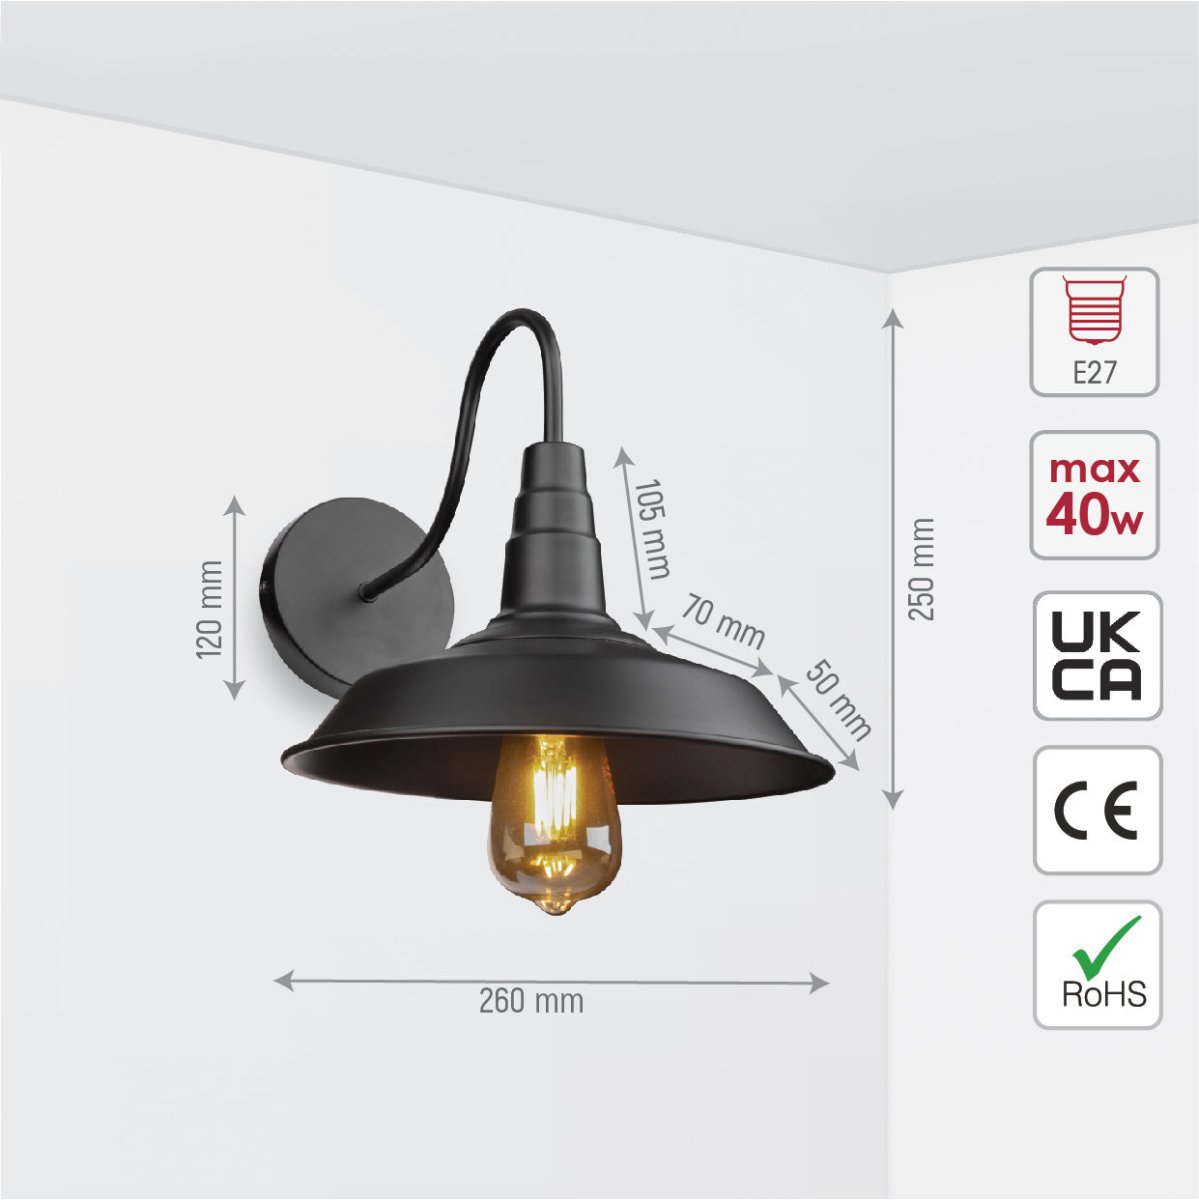 Size and specs of Black Swan Step Metal Industrial Retro Wall Light with E27 Fitting | TEKLED 151-19608